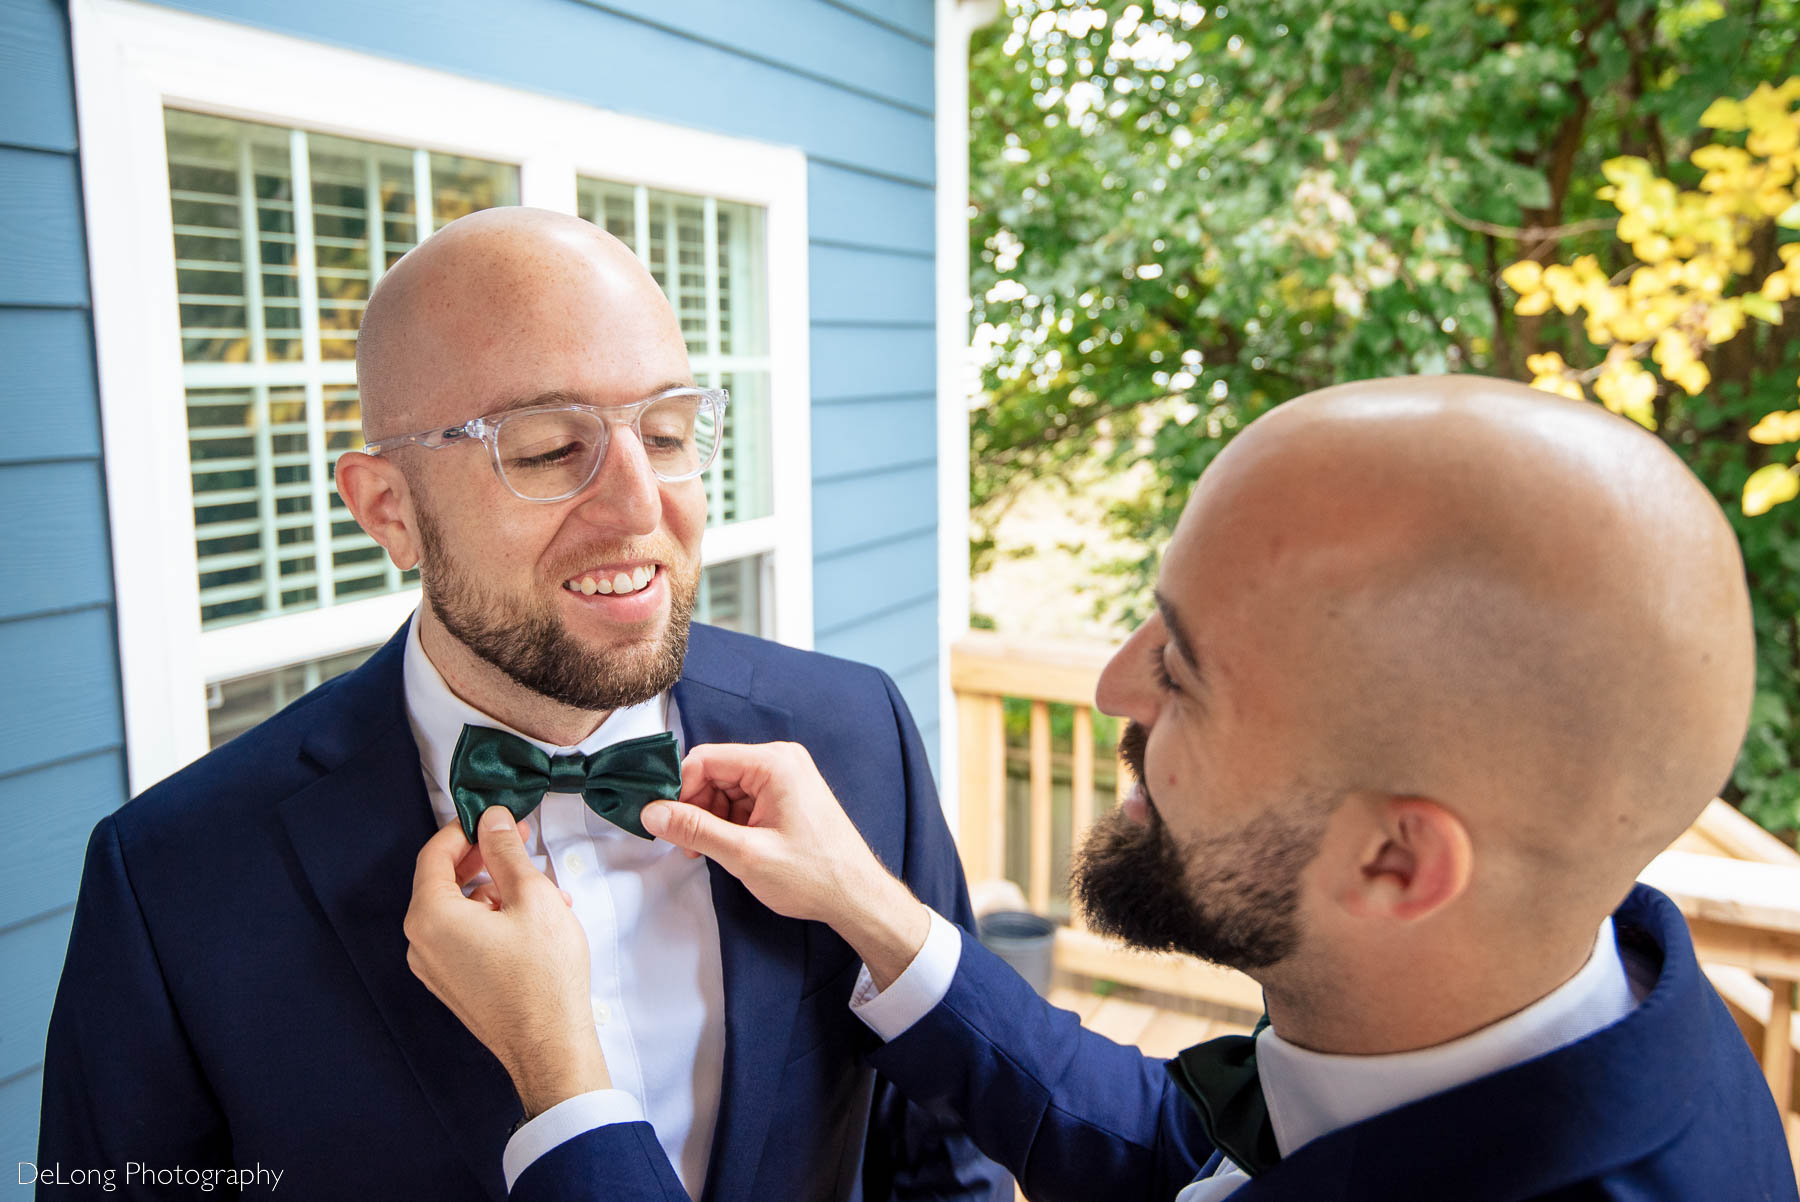 Groom having his tie adjusted while getting ready before the ceremony by Charlotte wedding photographers DeLong Photography